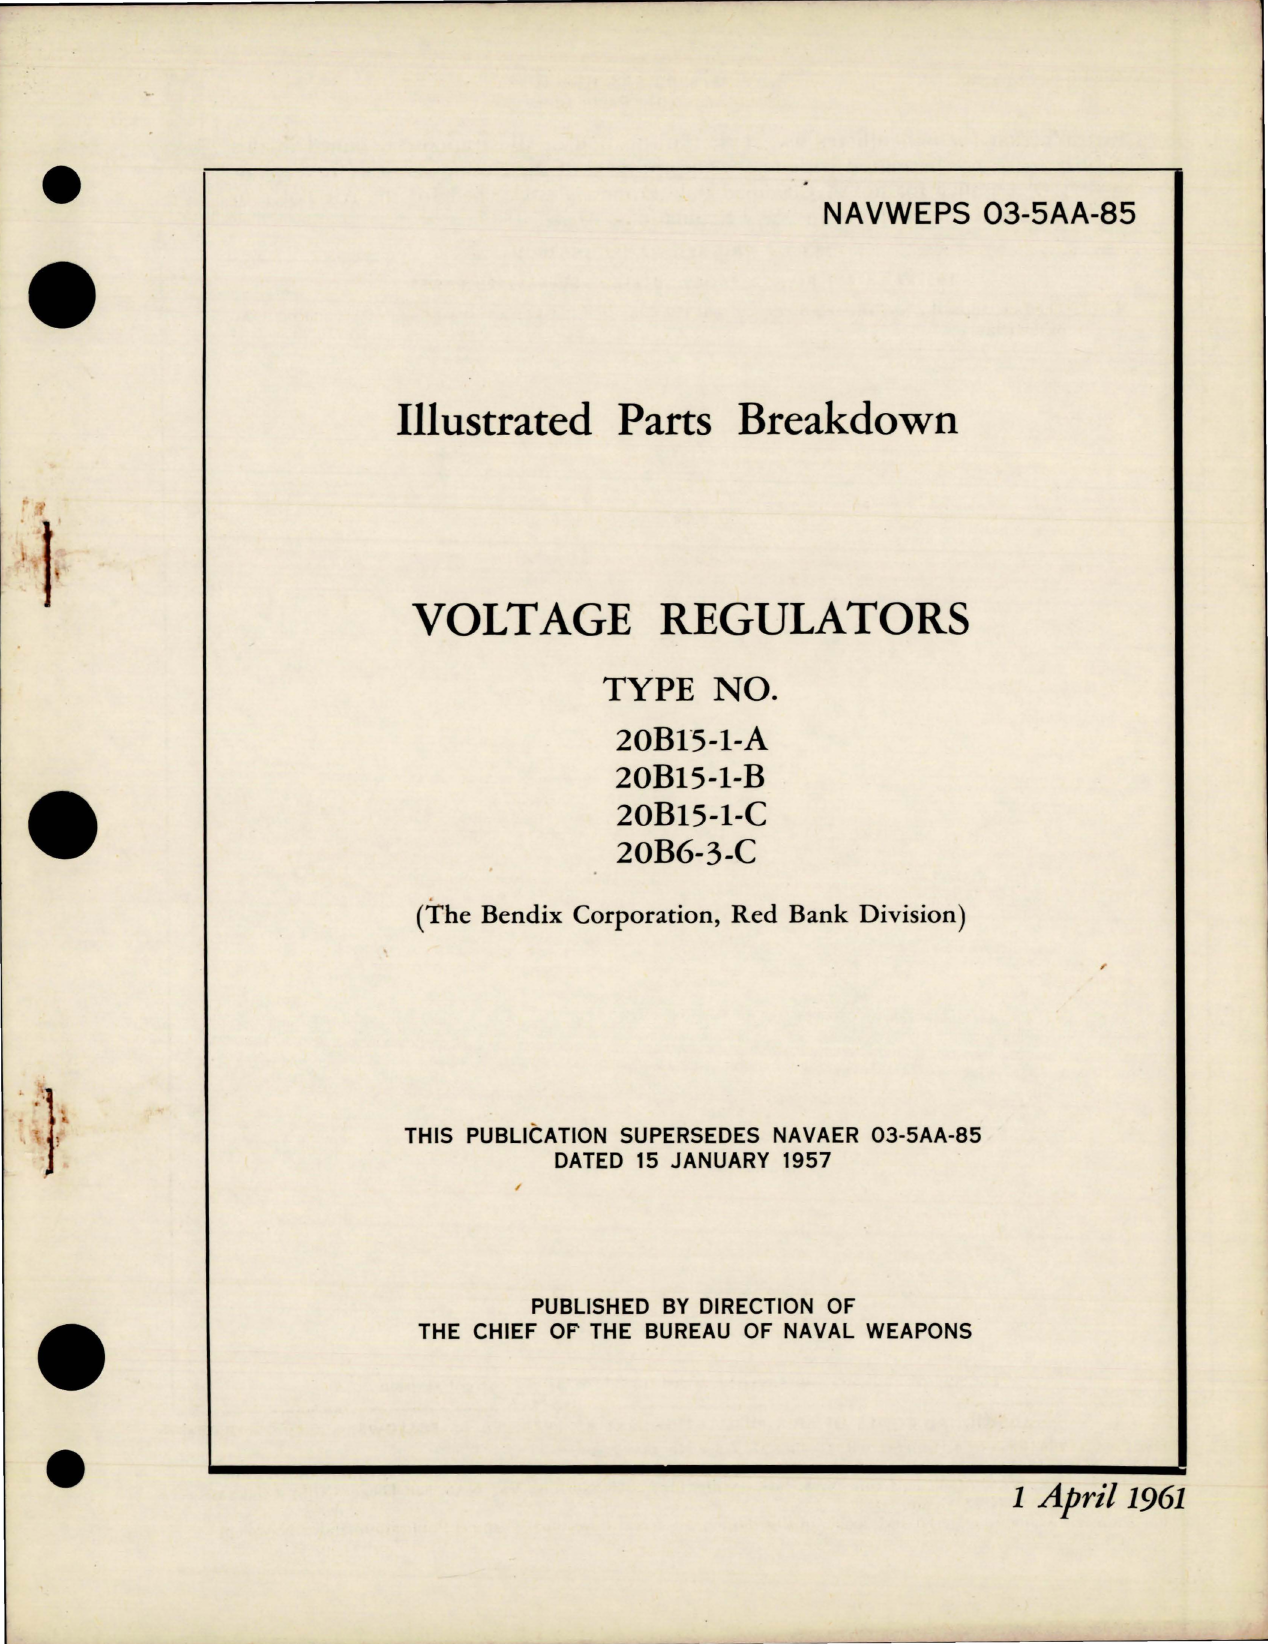 Sample page 1 from AirCorps Library document: Illustrated Parts Breakdown for Voltage Regulators - Types 20B15-1-A, 20B15-B, 20B15-C, and 20B6-3-C 